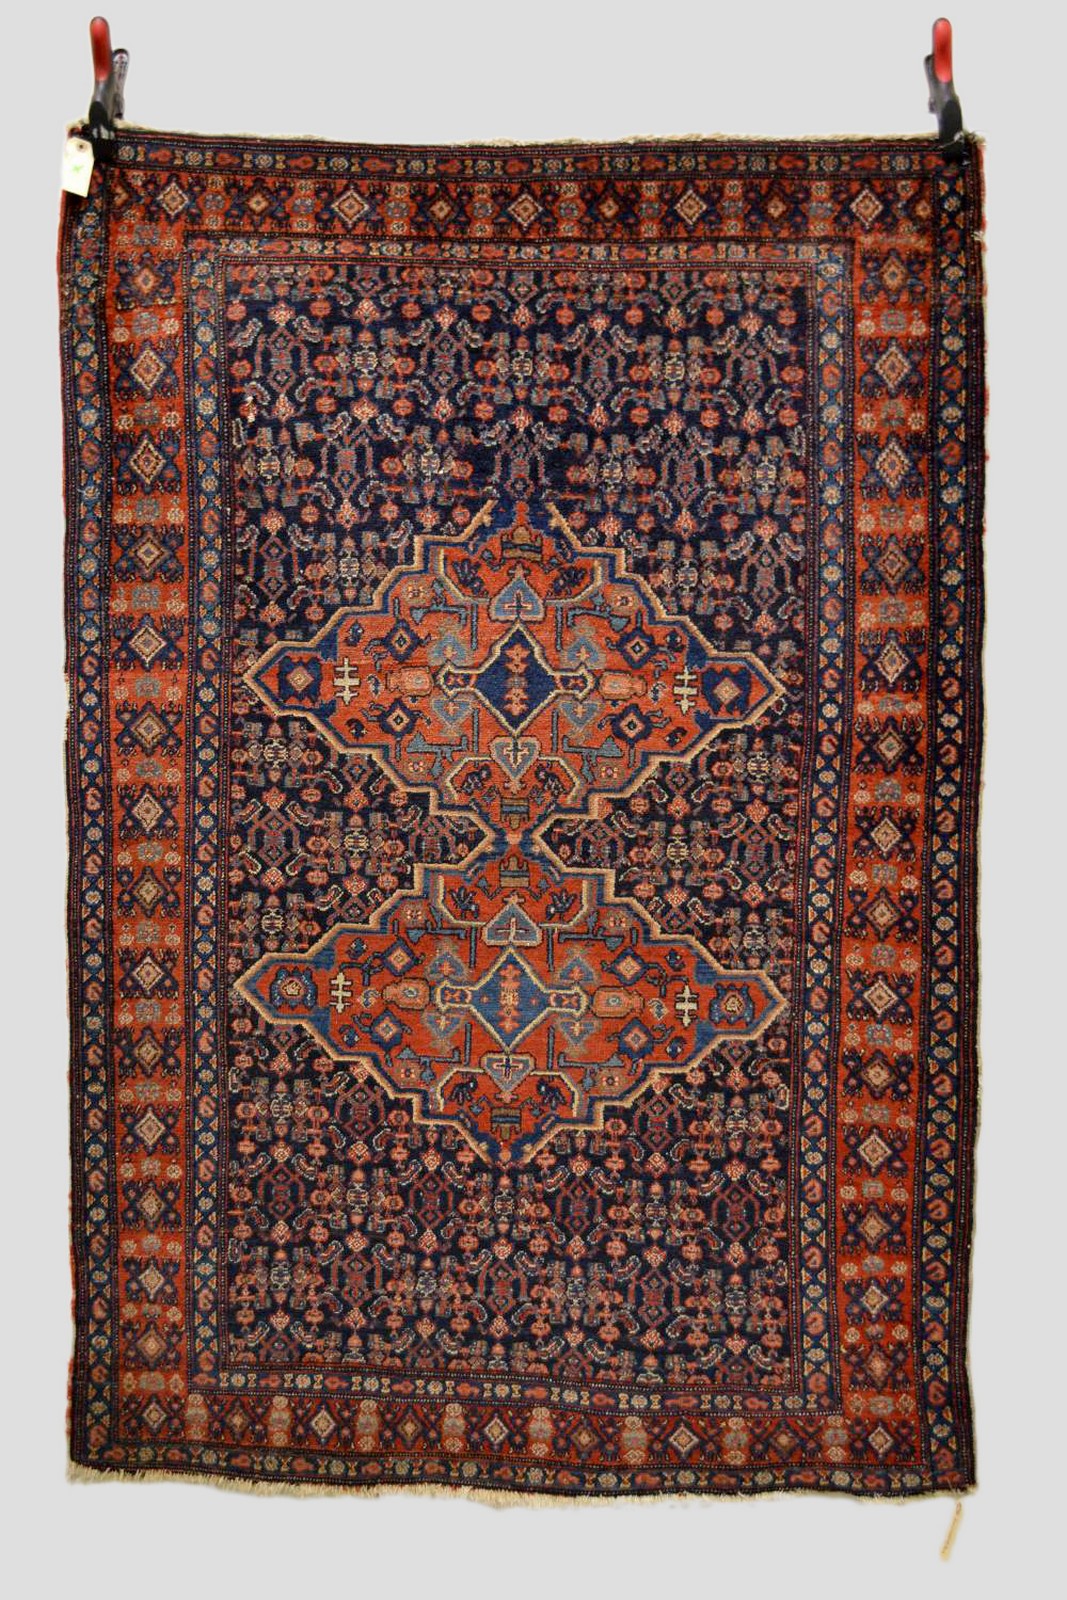 Senneh rug, Hamadan area, north west Persia, about 1920s, 5ft. 3in. x 3ft. 7in. 1.60m. x 1.09m.